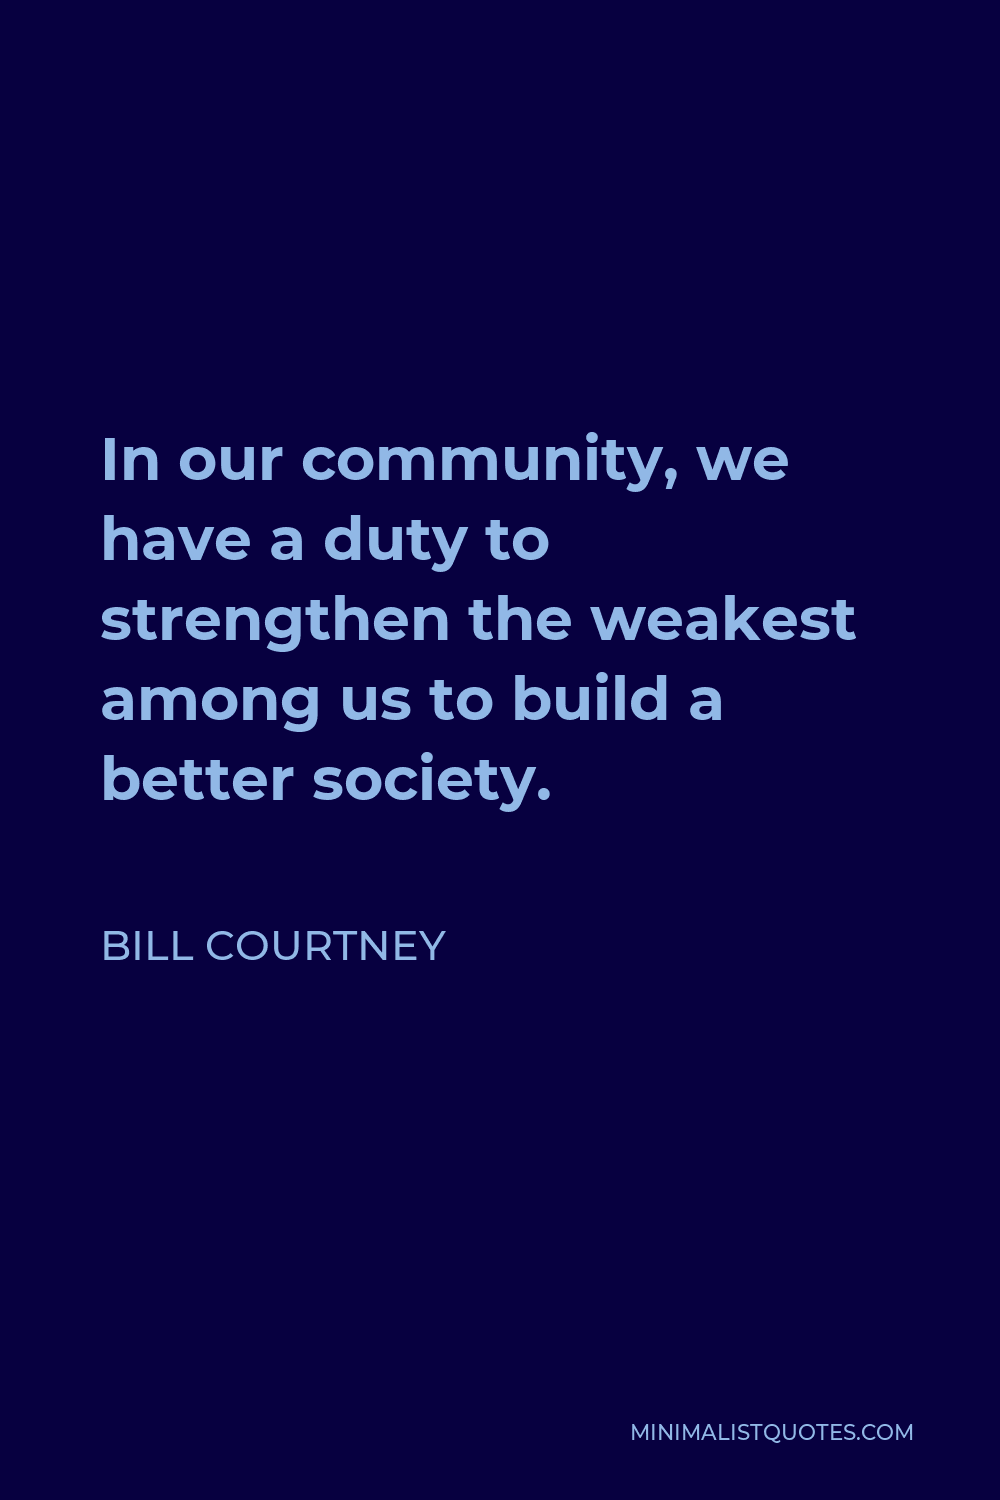 Bill Courtney Quote - In our community, we have a duty to strengthen the weakest among us to build a better society.